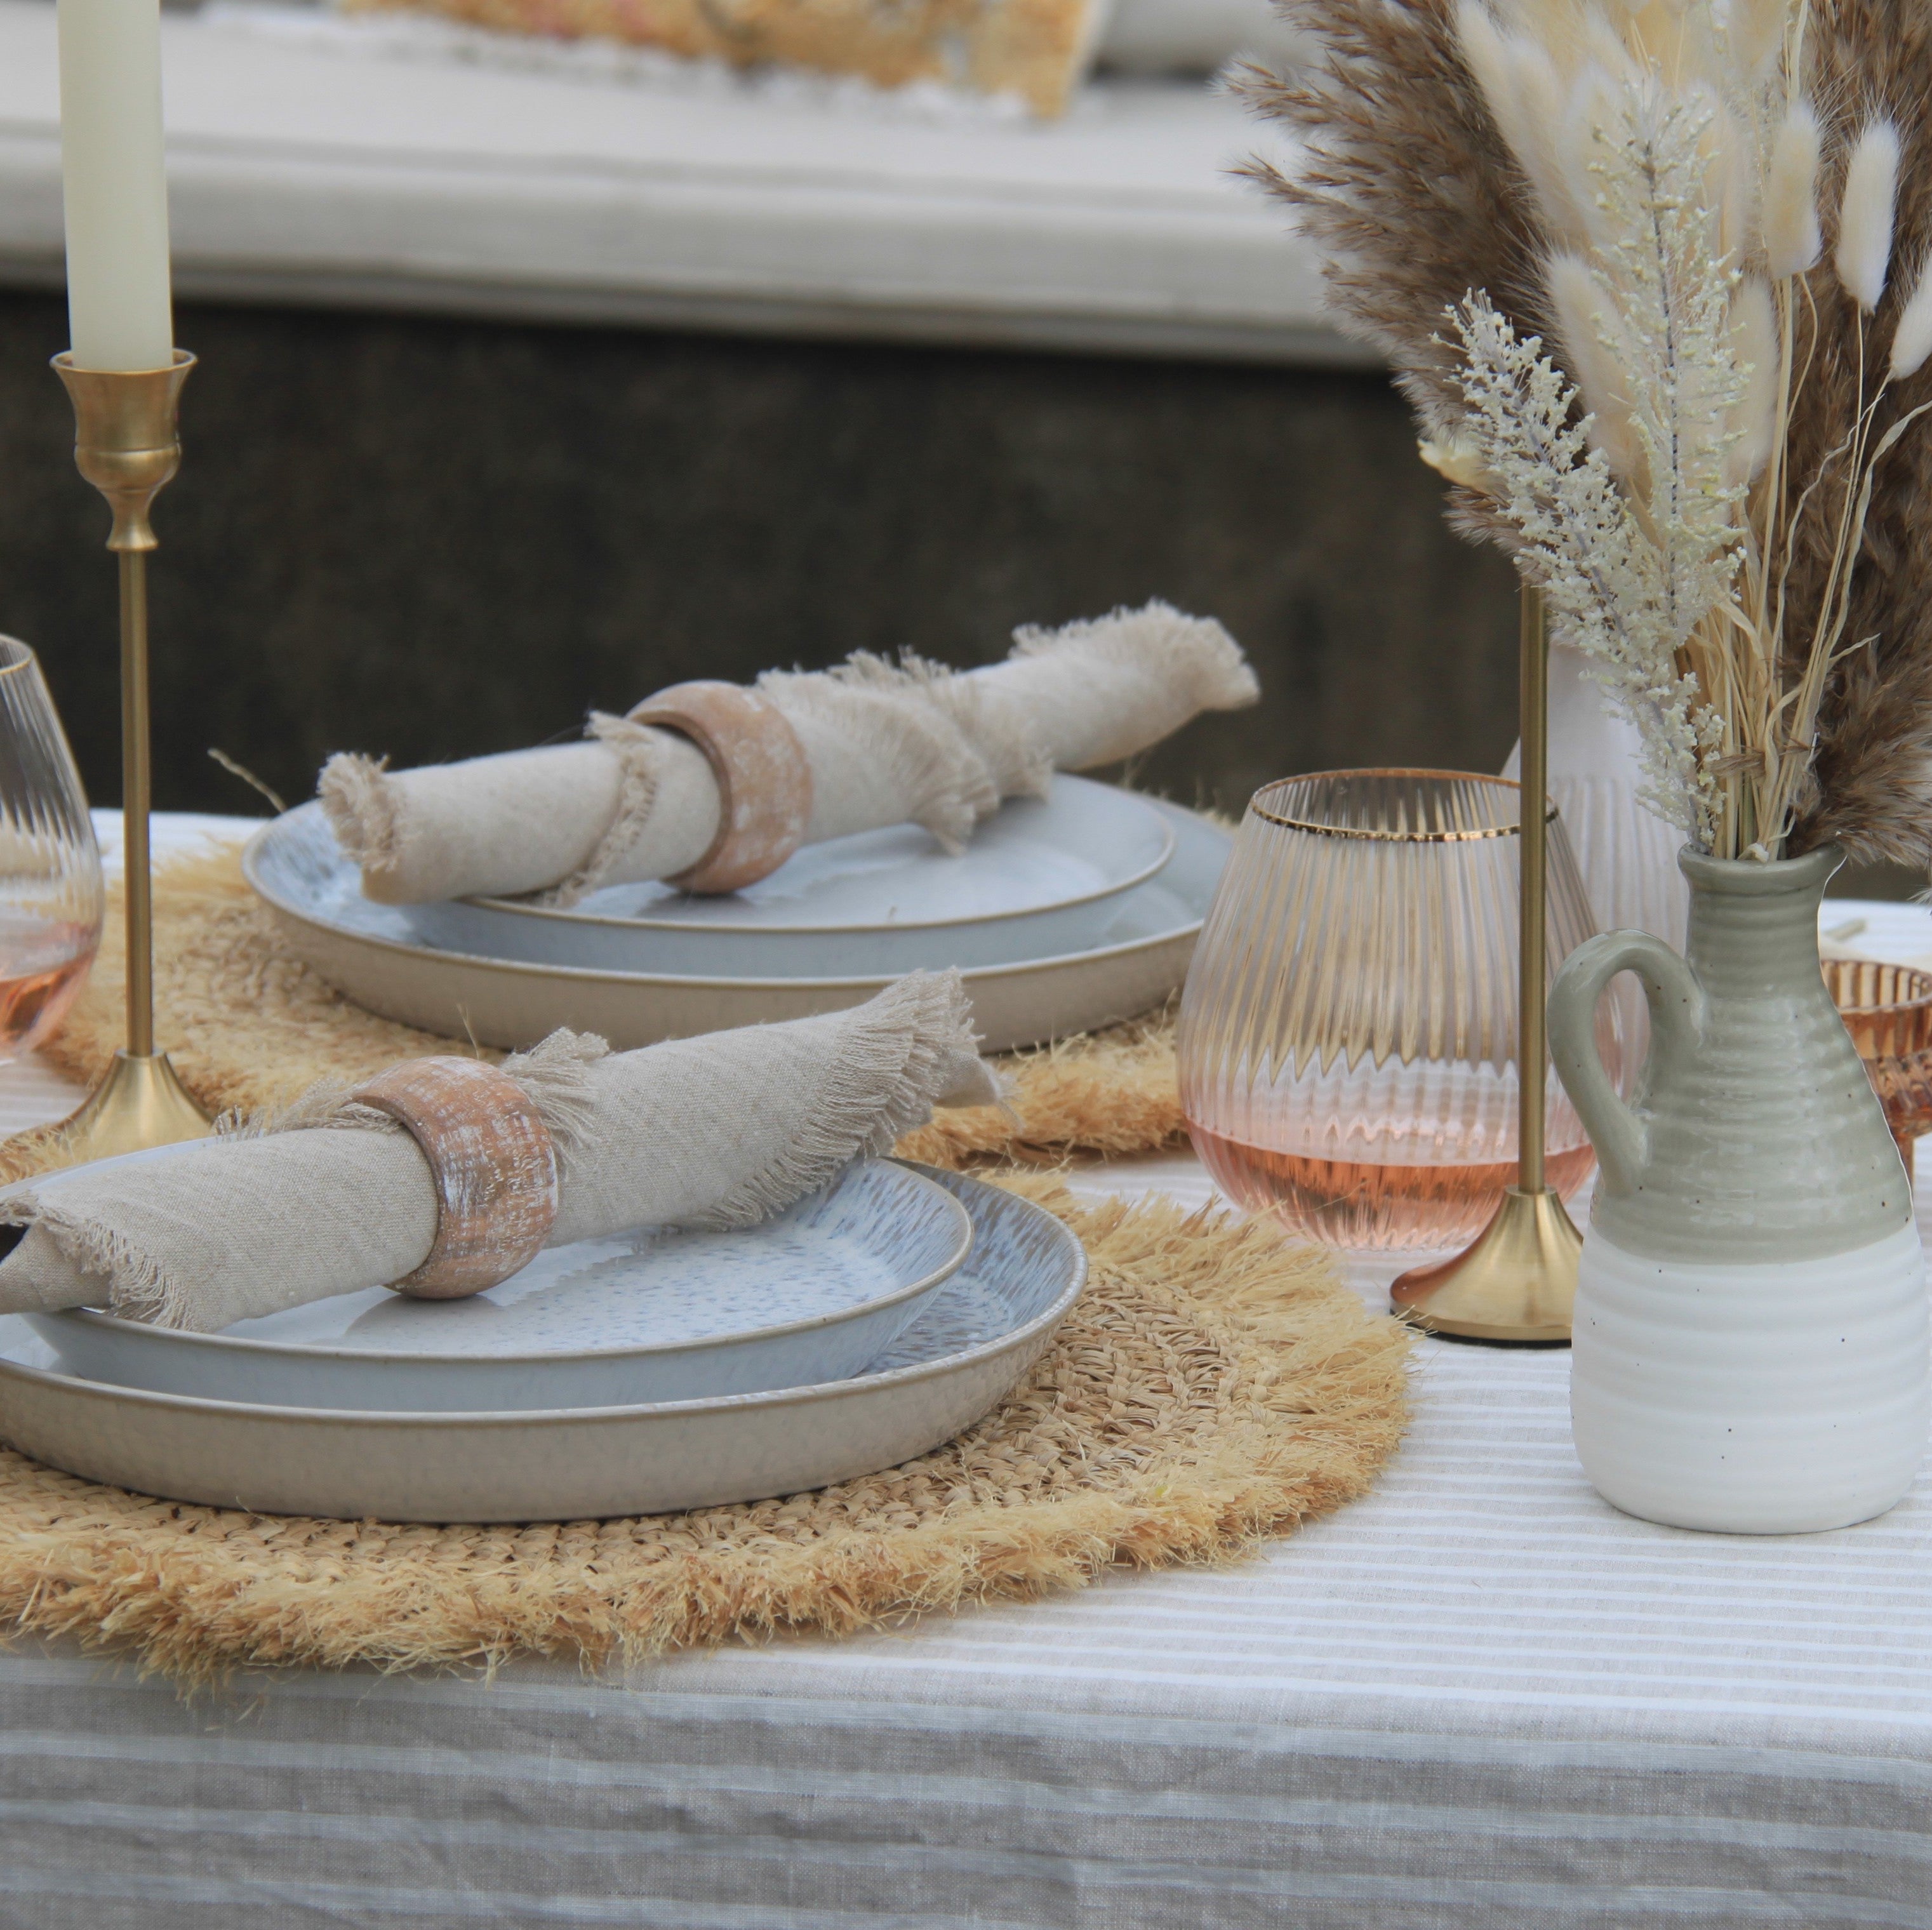 Wooden napkin rings with natural napkins